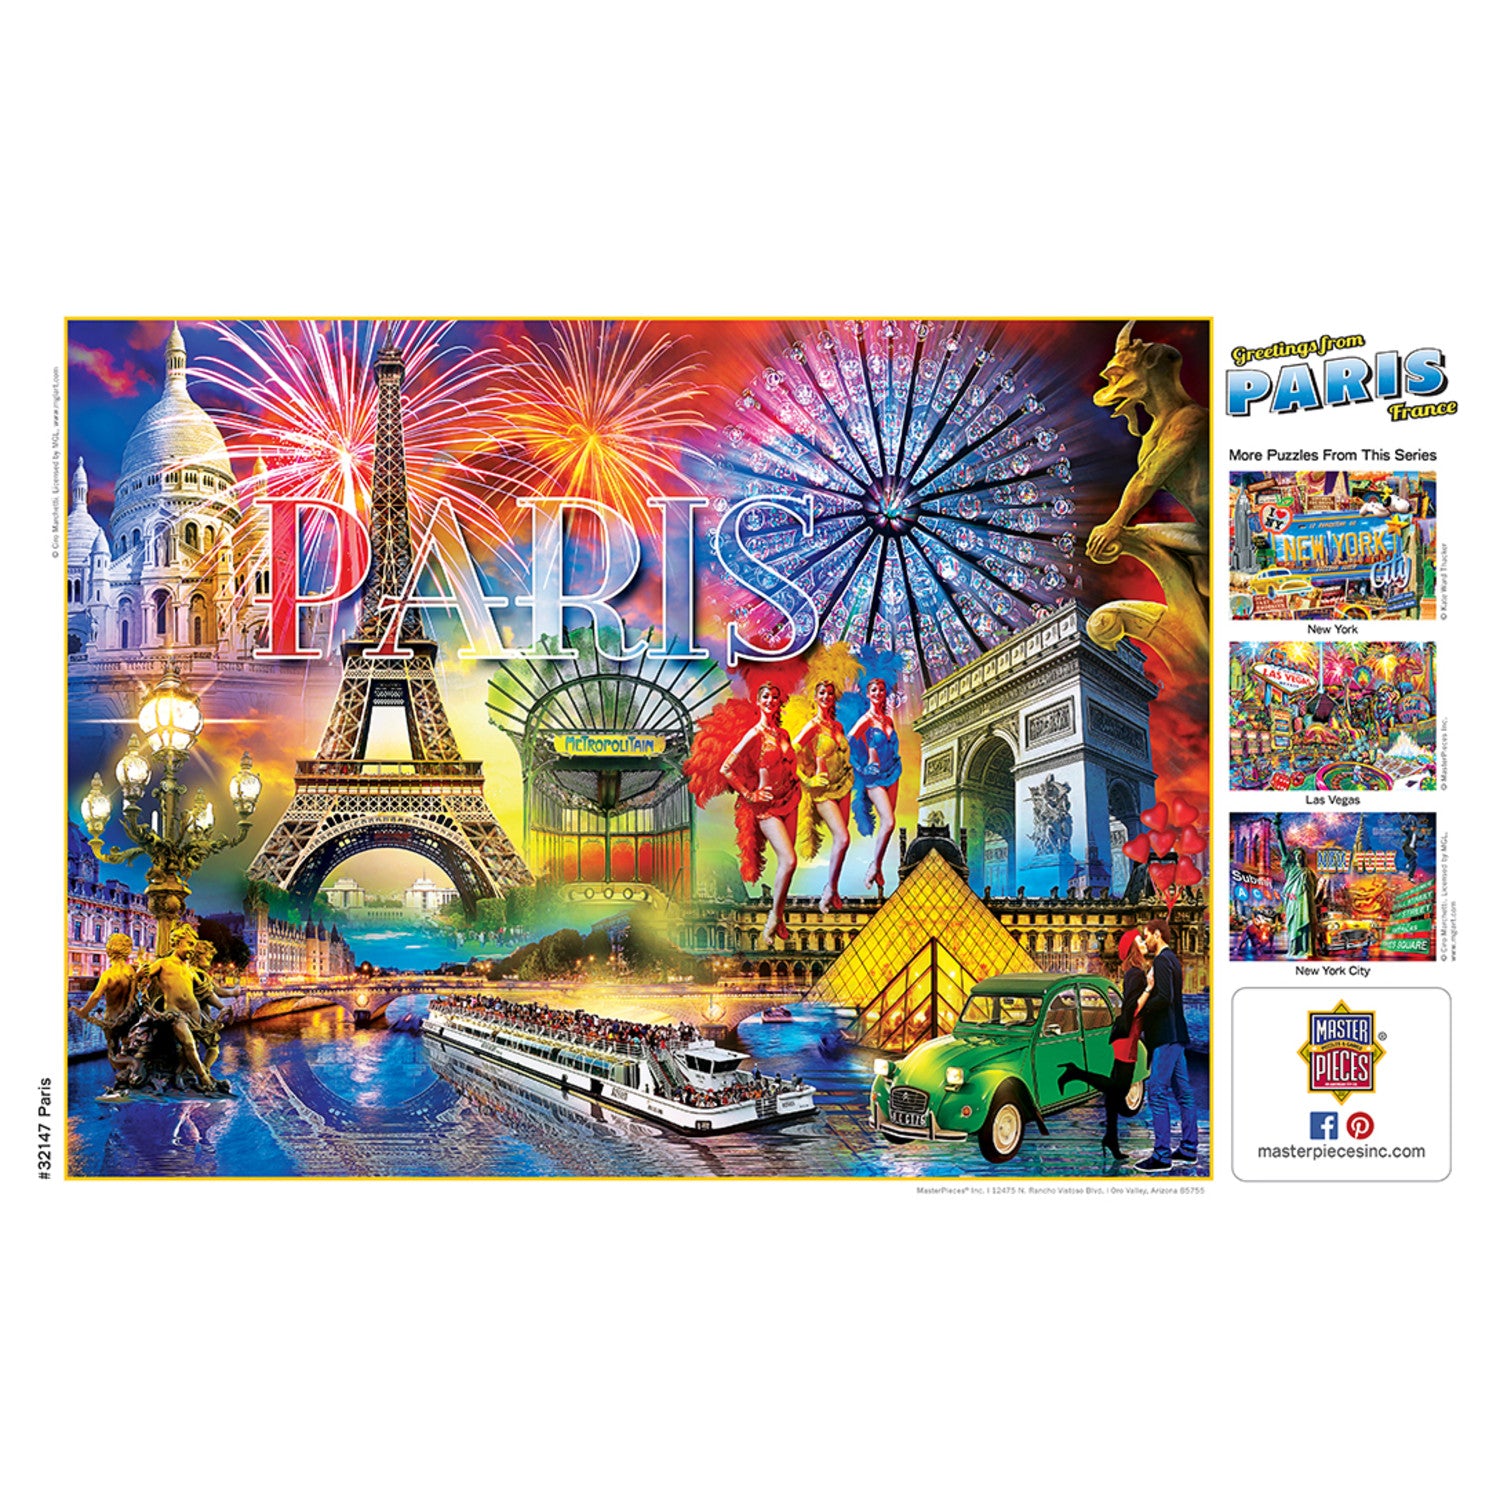 Greetings From Paris - 550 Piece Jigsaw Puzzle